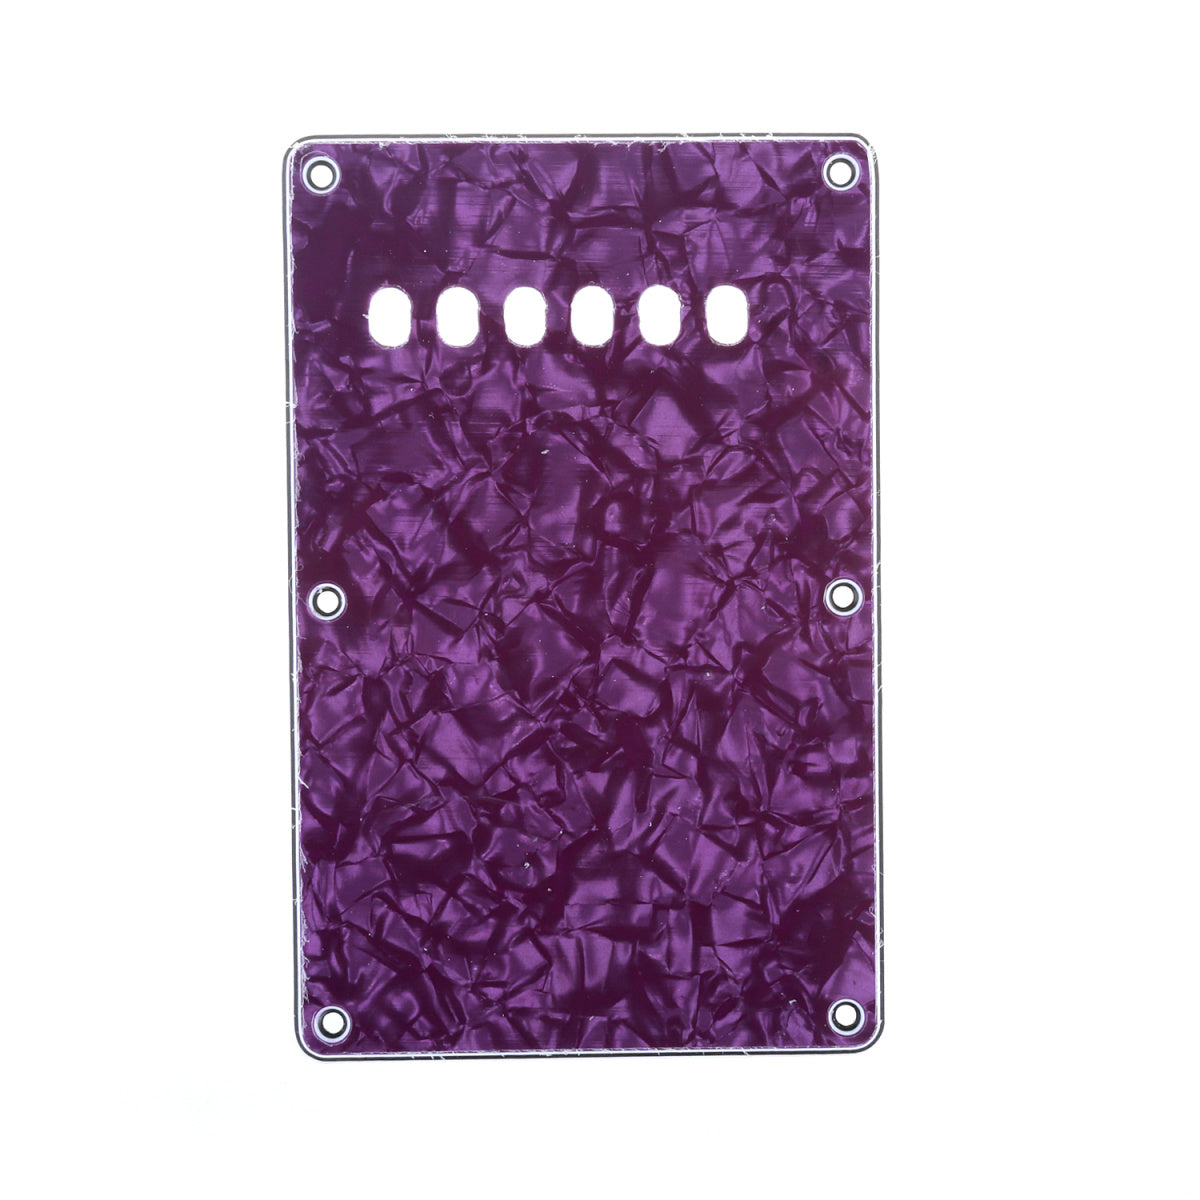 Musiclily 6 Hole Guitar Back Plate for China Made Squier, 4Ply Purple Pearl